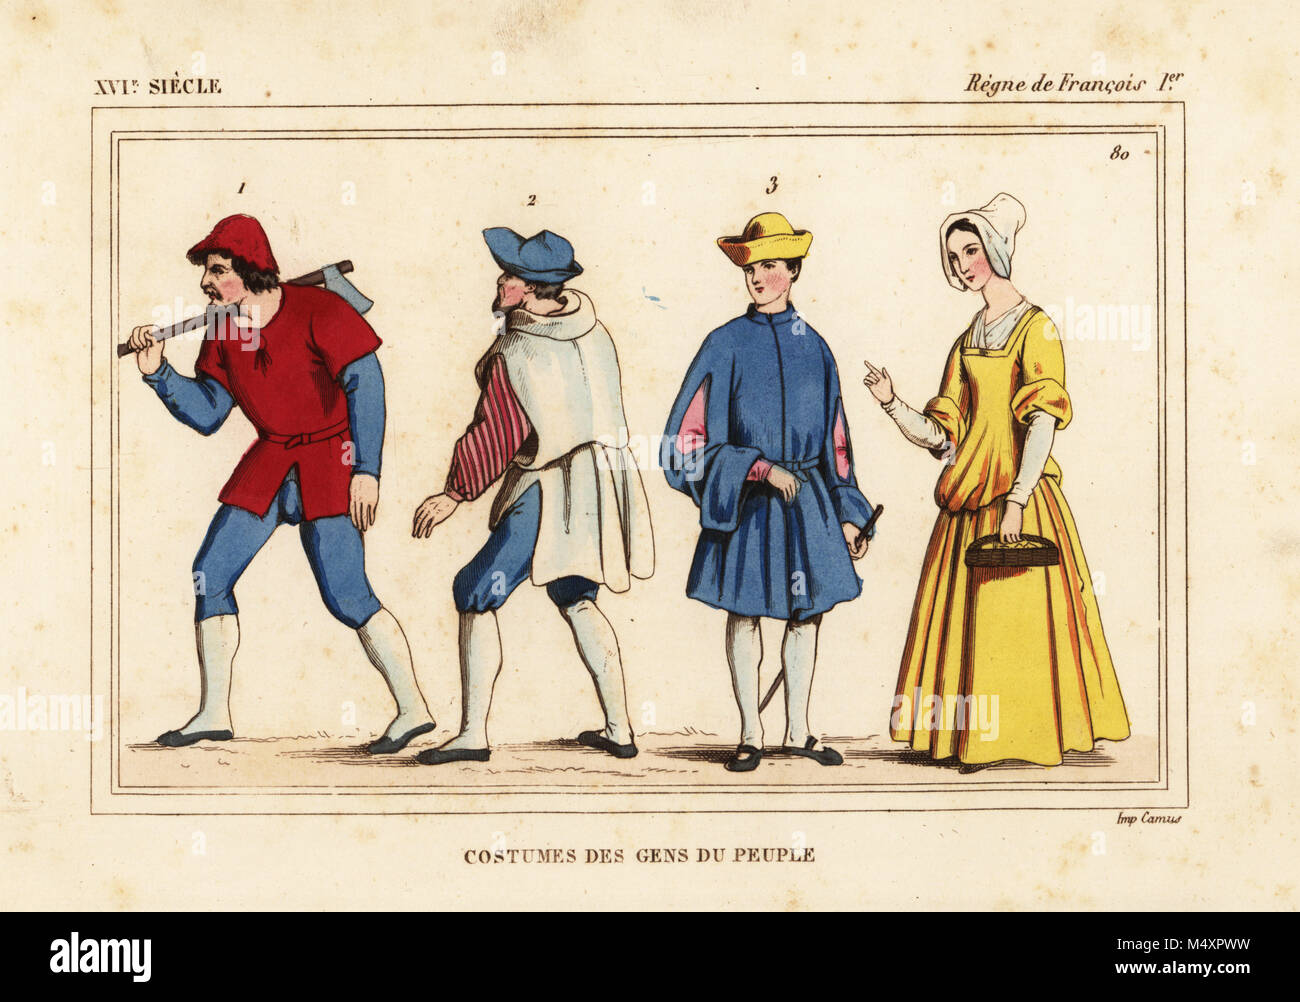 Worker with large axe, artisan, merchant and woman of Paris. Costumes of the people of Paris, reign of King Francis I of France. Handcoloured lithograph after figures in Roger de Gaignieres' portfolios from Le Bibliophile Jacob aka Paul Lacroix's Costumes Historiques de la France (Historical Costumes of France), Administration de Librairie, Paris, 1852. Stock Photo